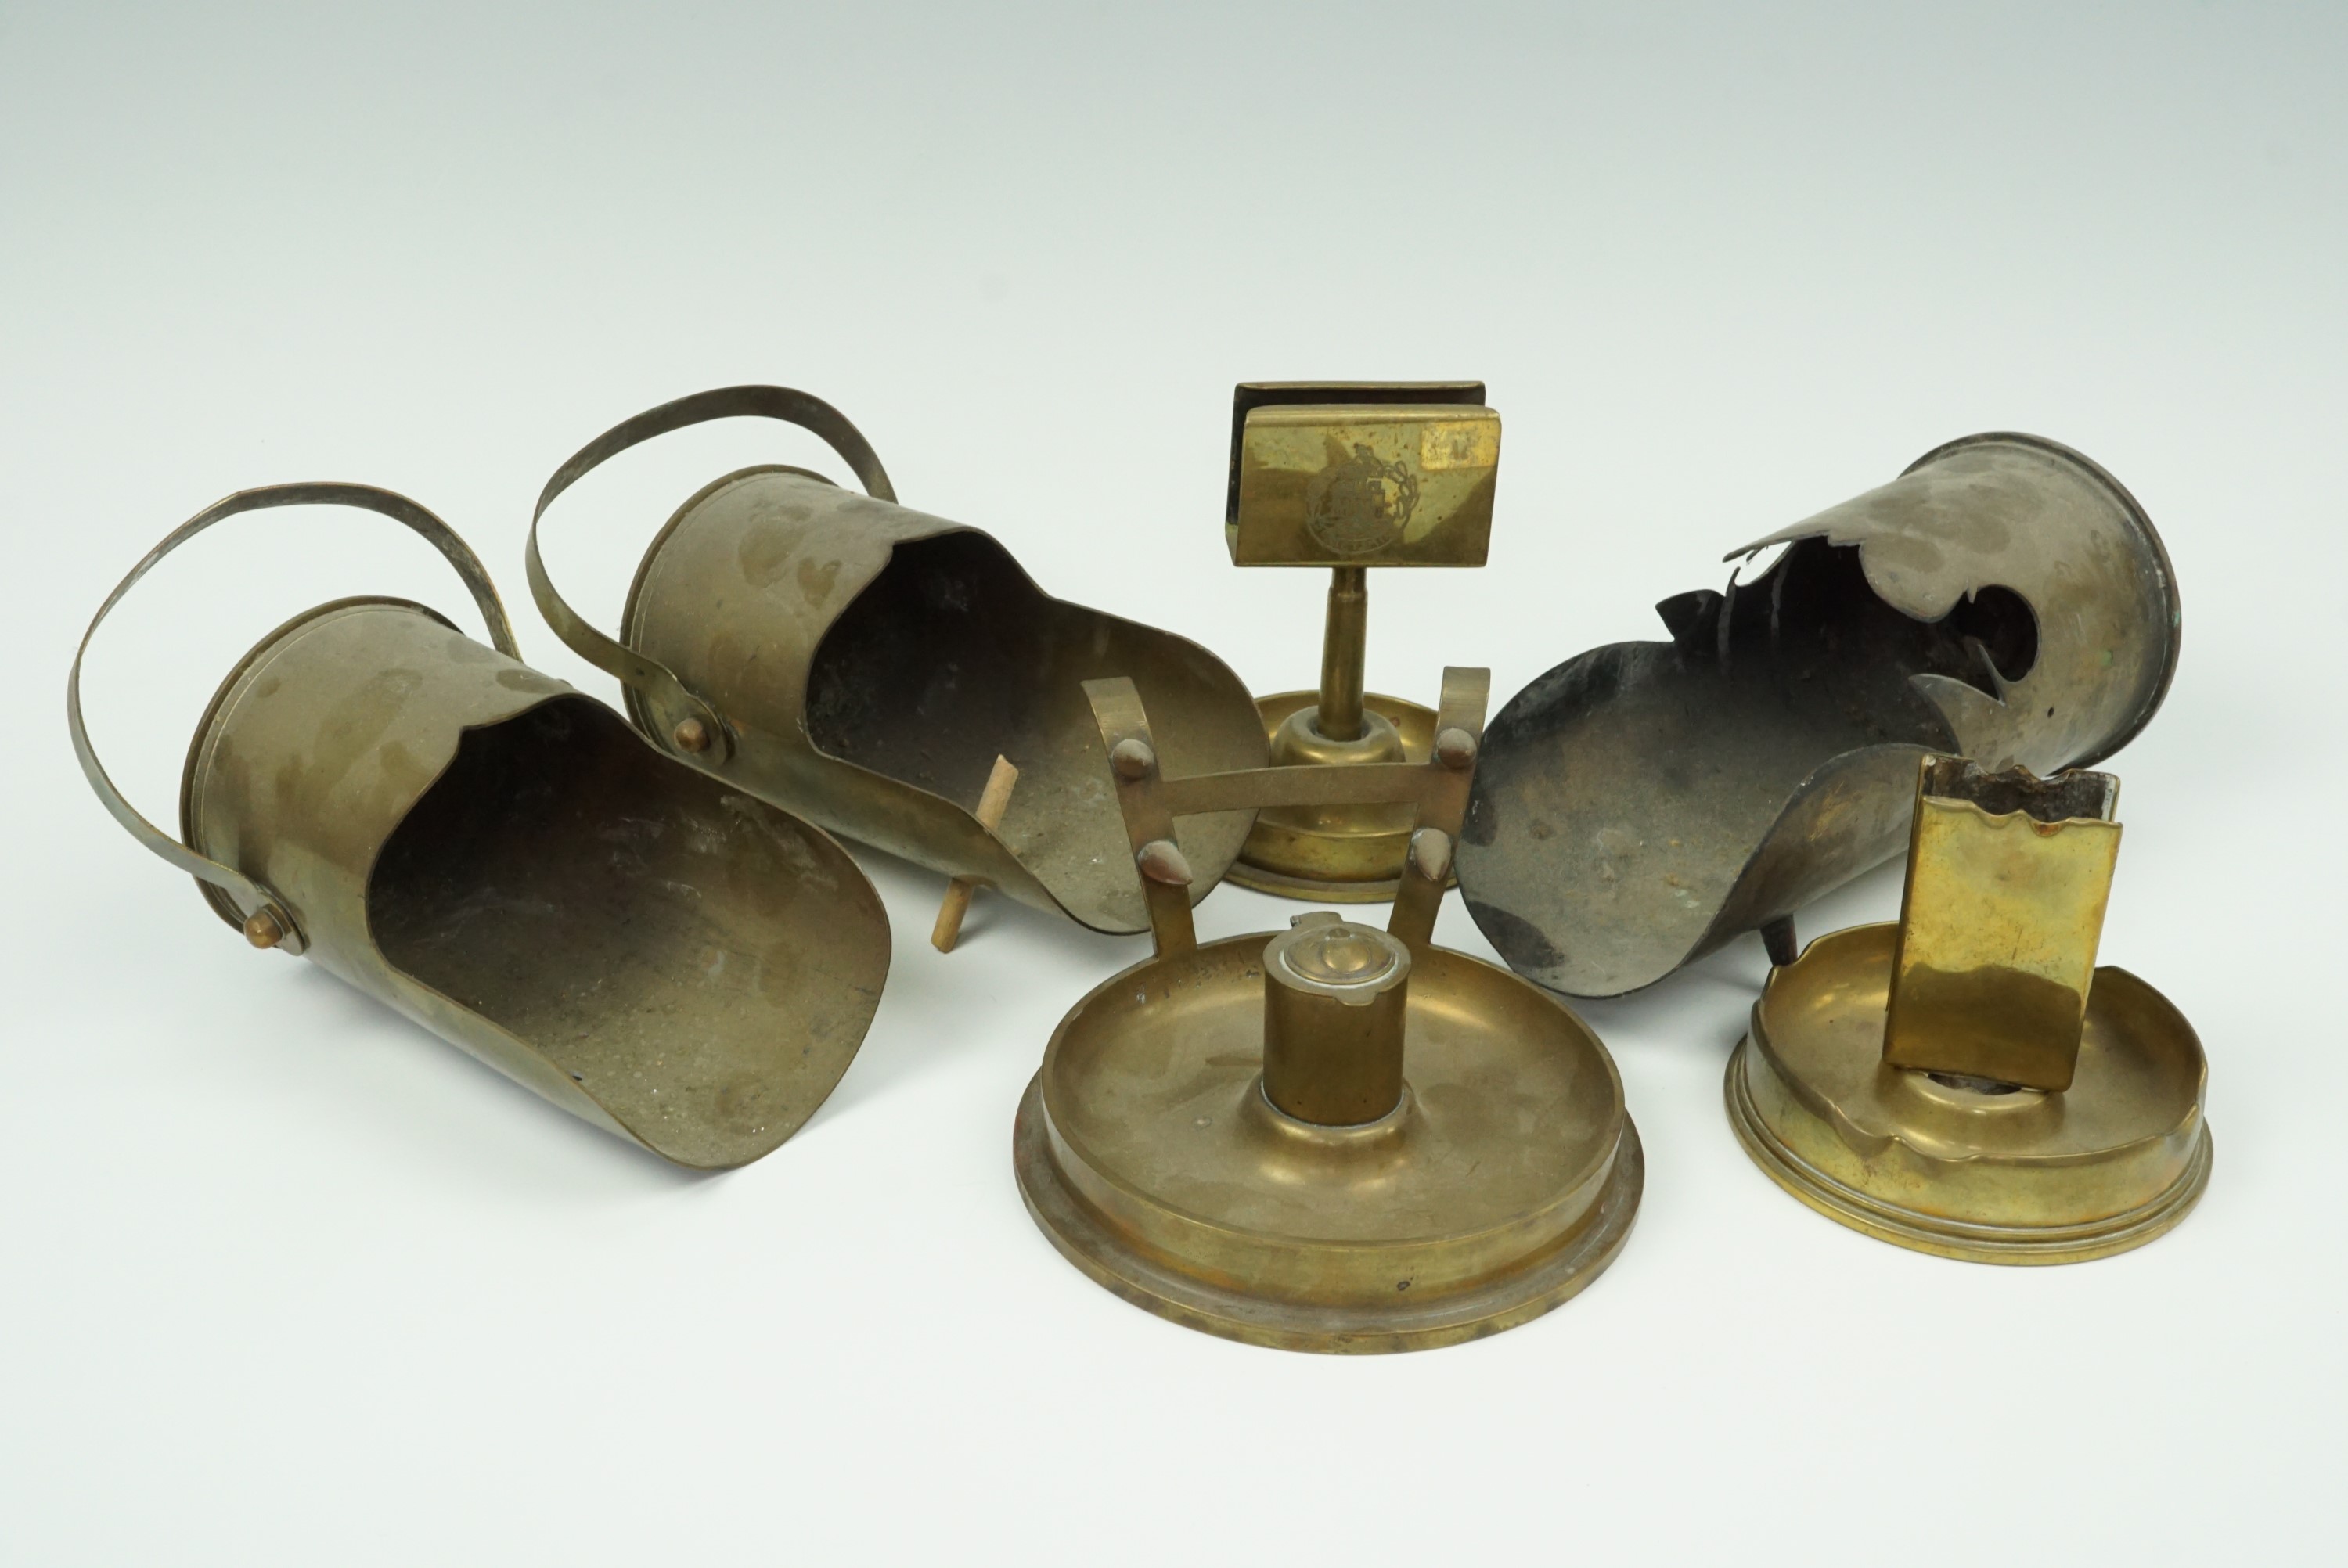 A group of trench art scuttles etc